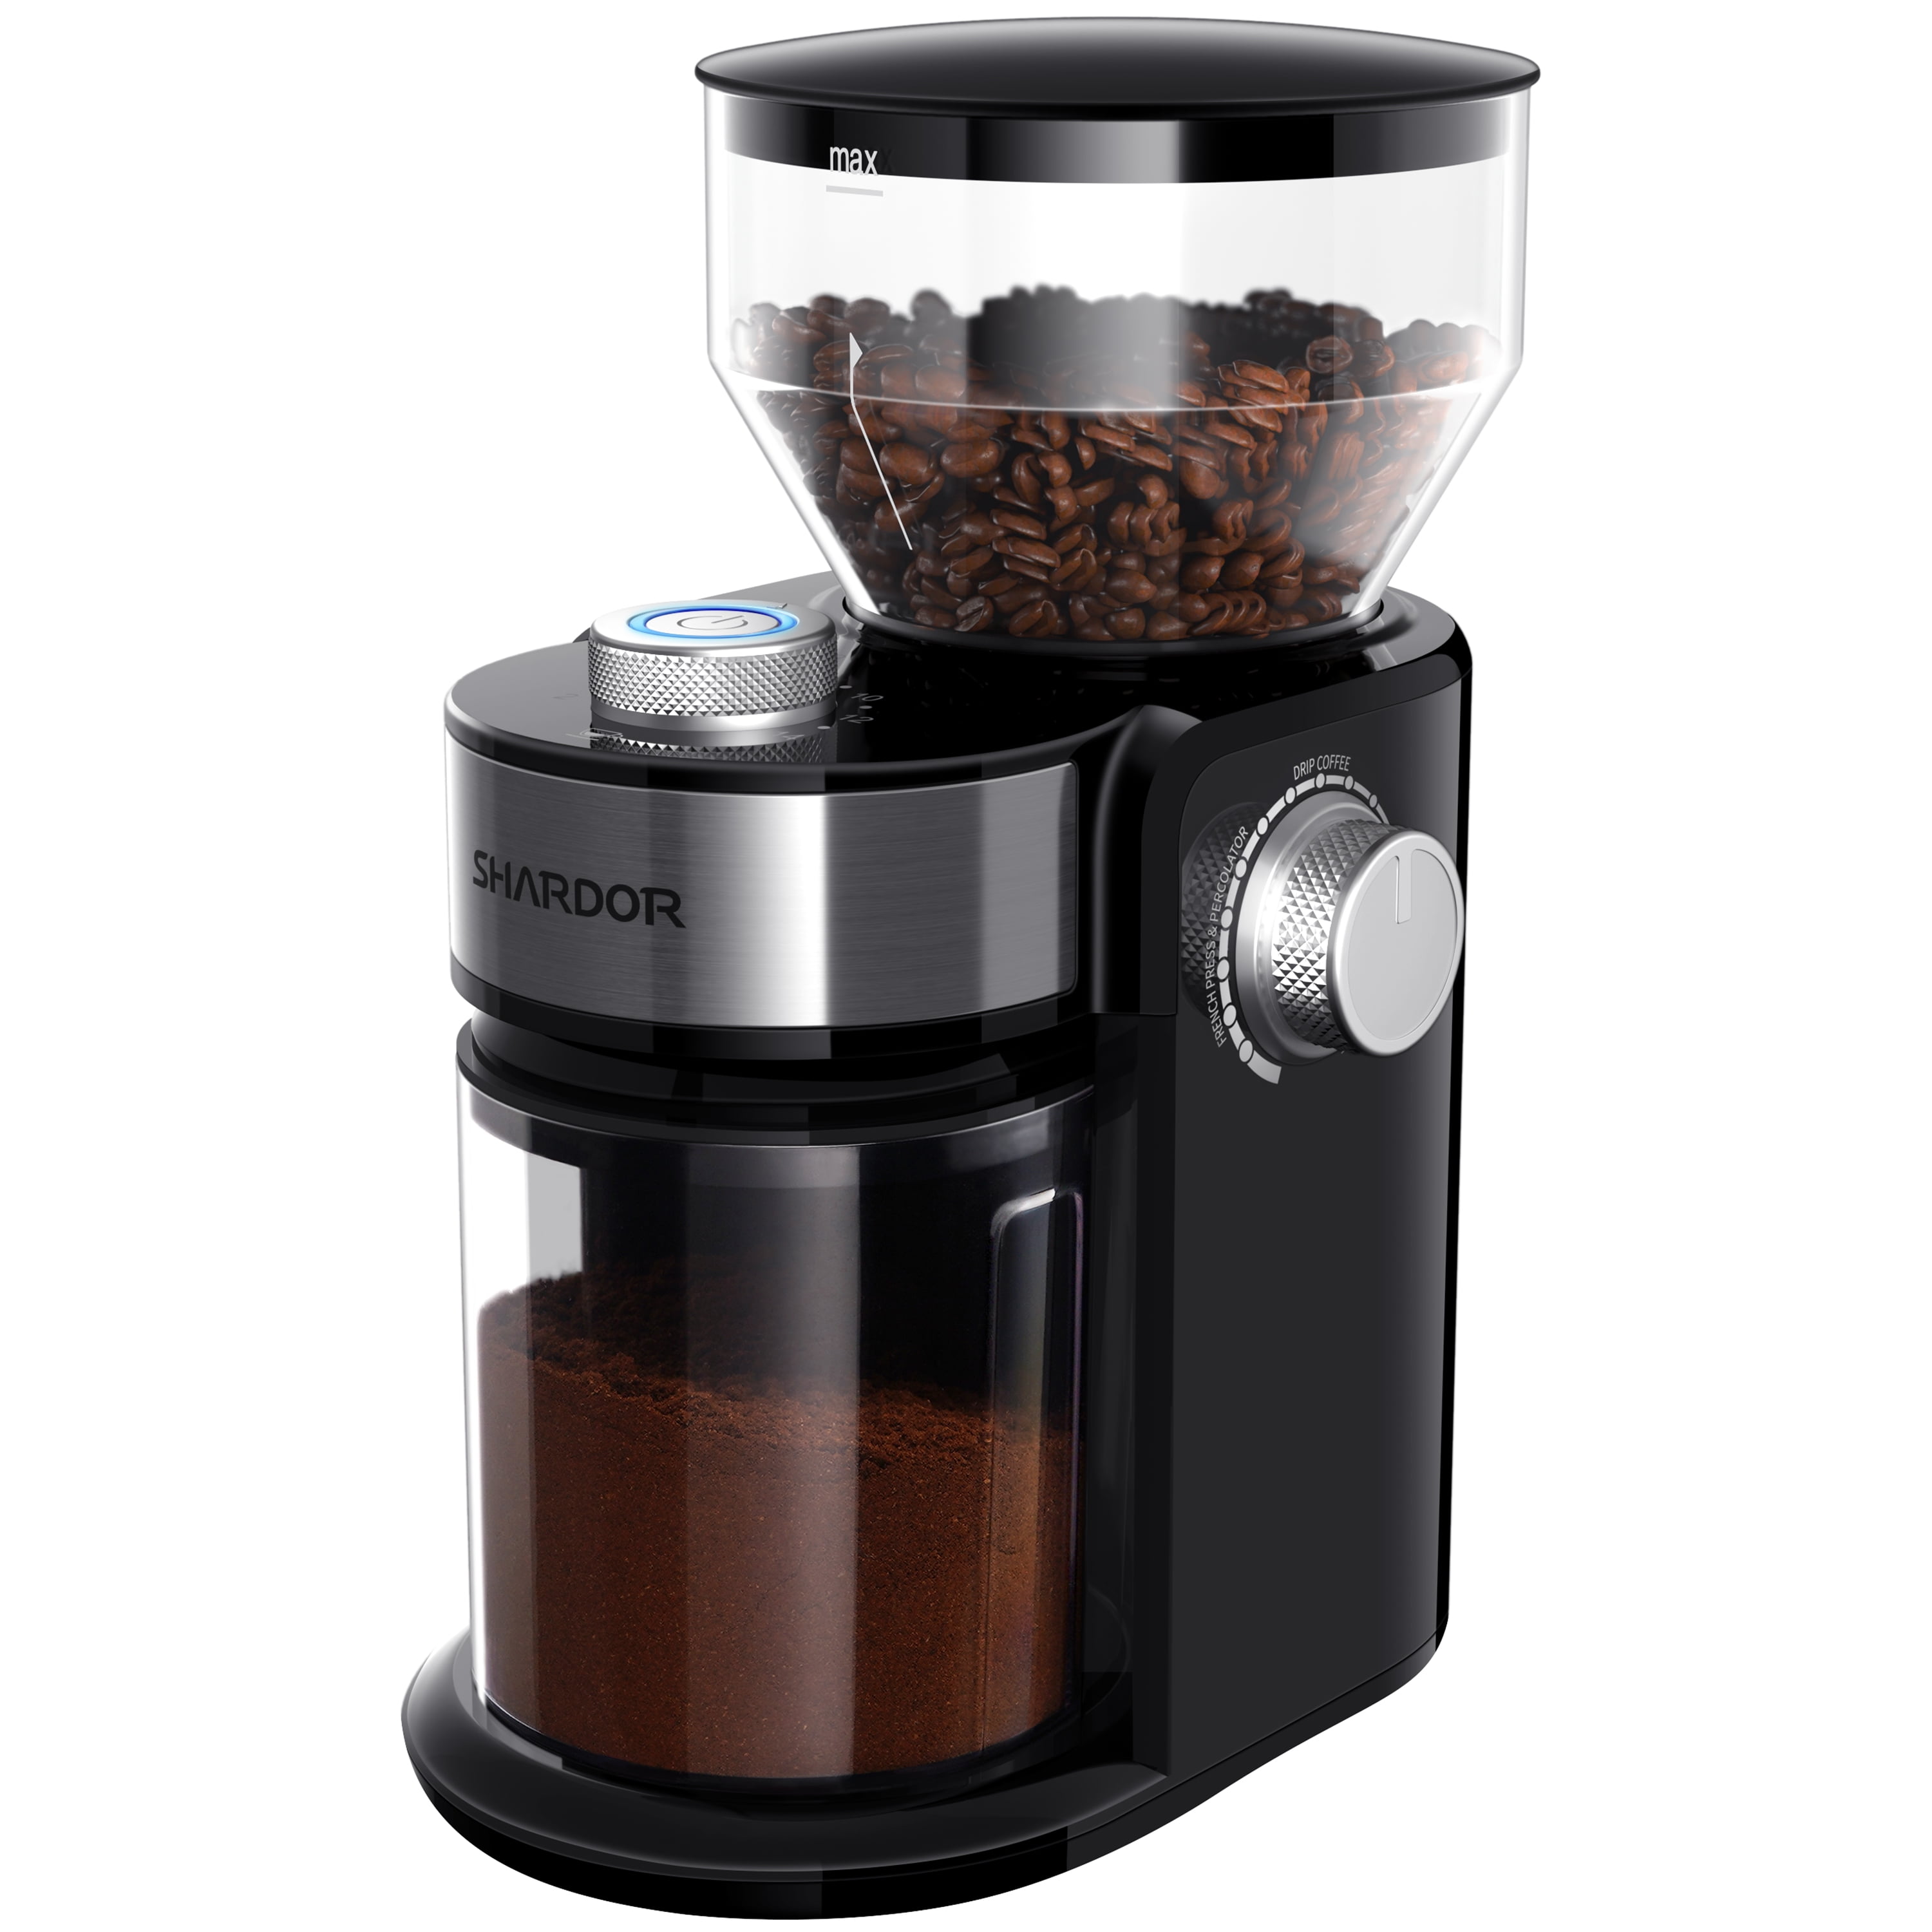 COFEST Cuisinart Coffee Grinder,Electric Burr One-Touch Automatic Grinder, Coffee Bean Grinder,Stainless Steel for Drip,Percolator,French  Press,Espresso 